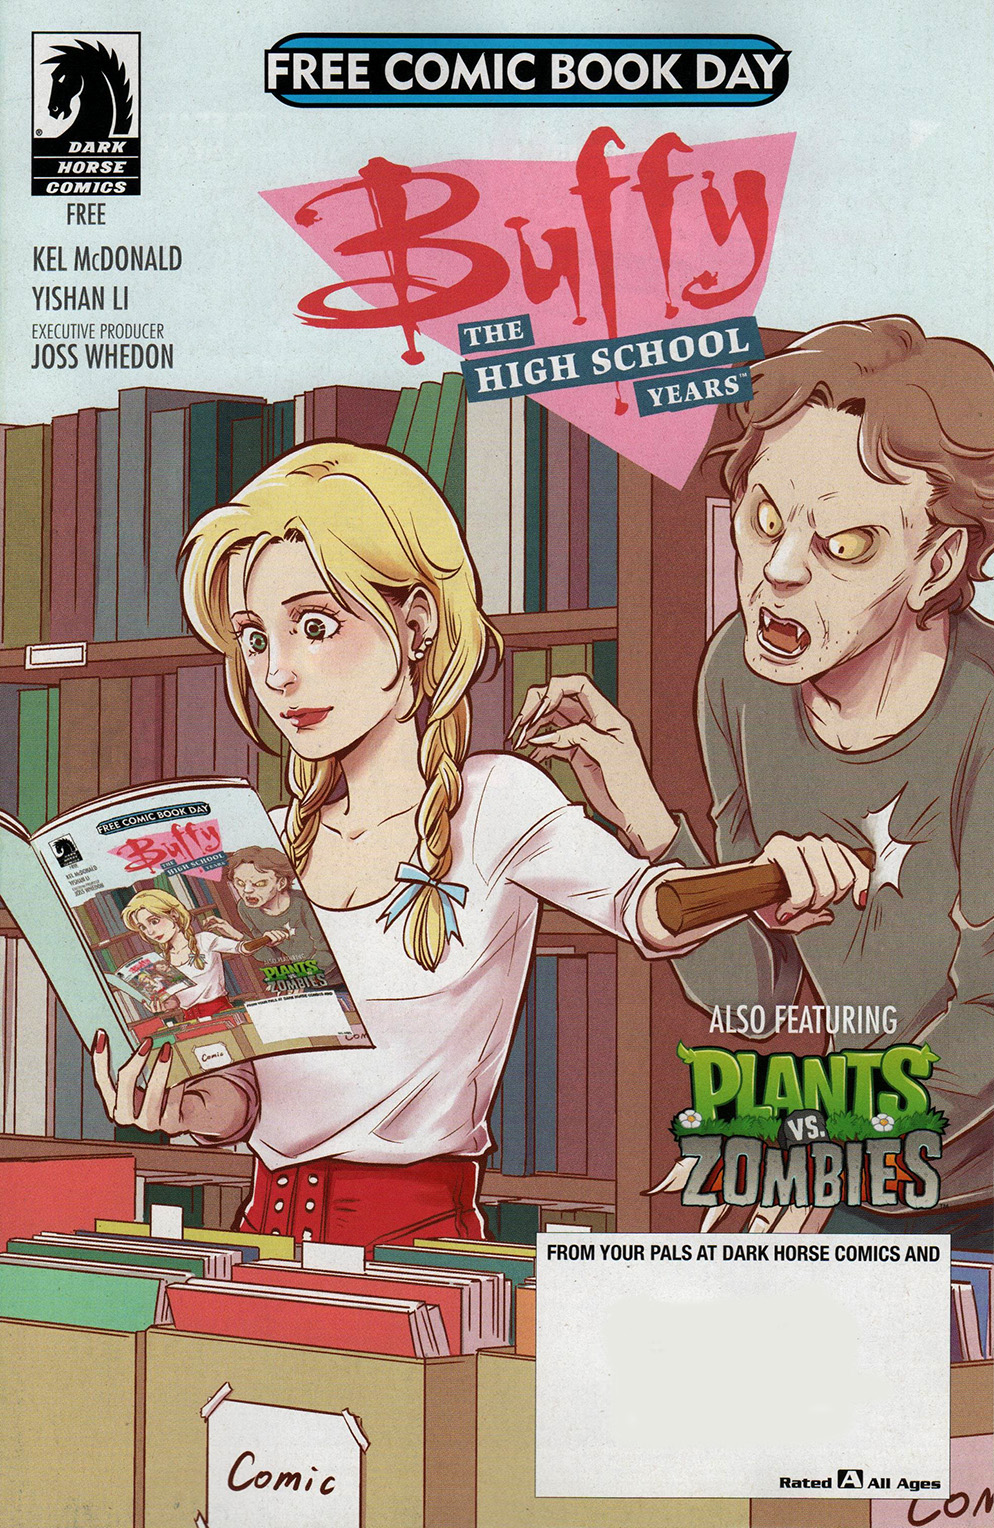 Read online Free Comic Book Day 2017 comic -  Issue # Buffy - Plants vs Zombies - 1